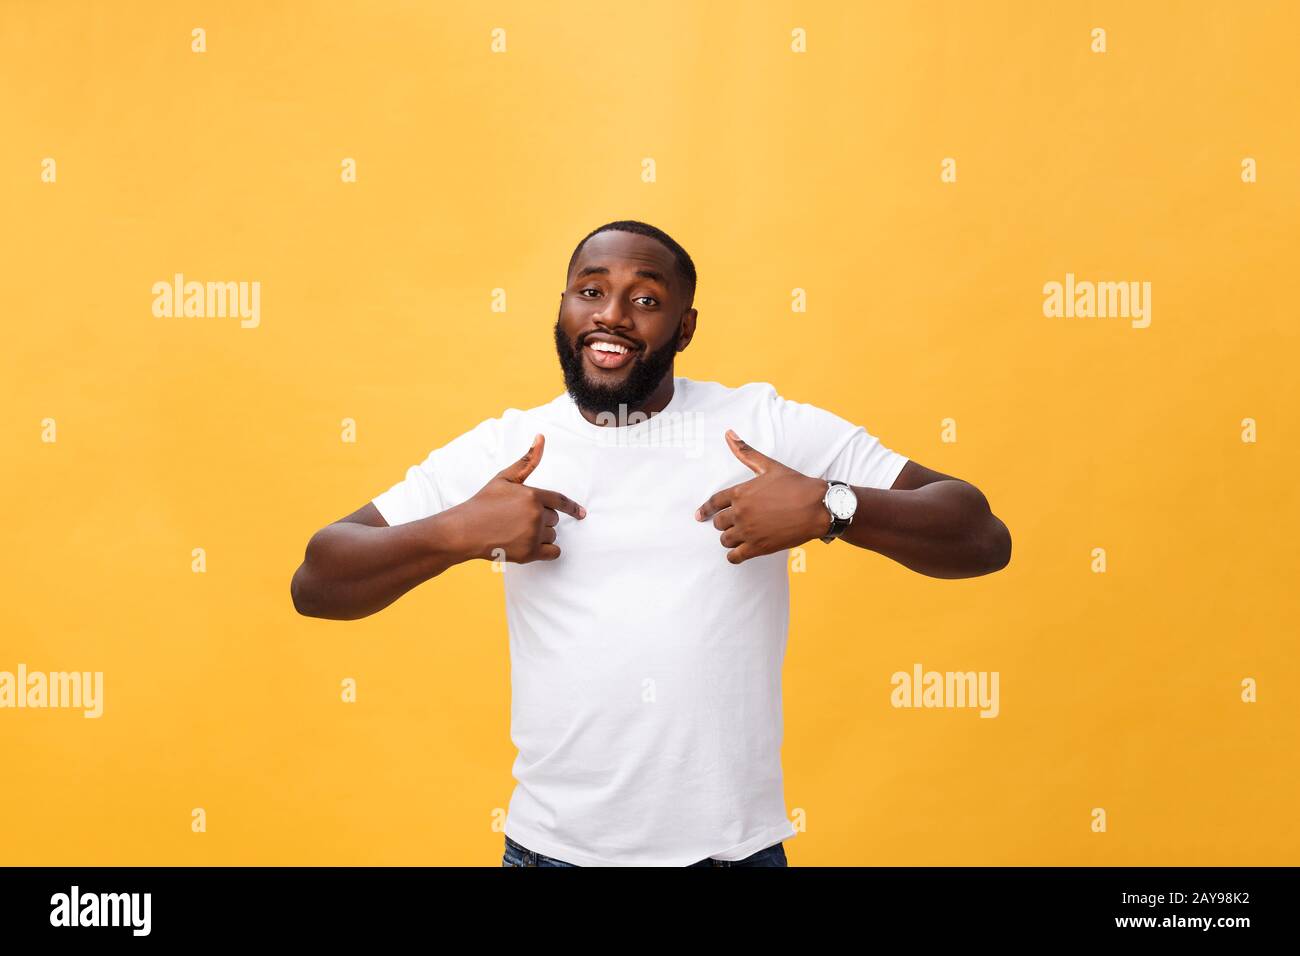 Young african american man over isolated background looking confident with smile on face, pointing oneself with fingers proud an Stock Photo